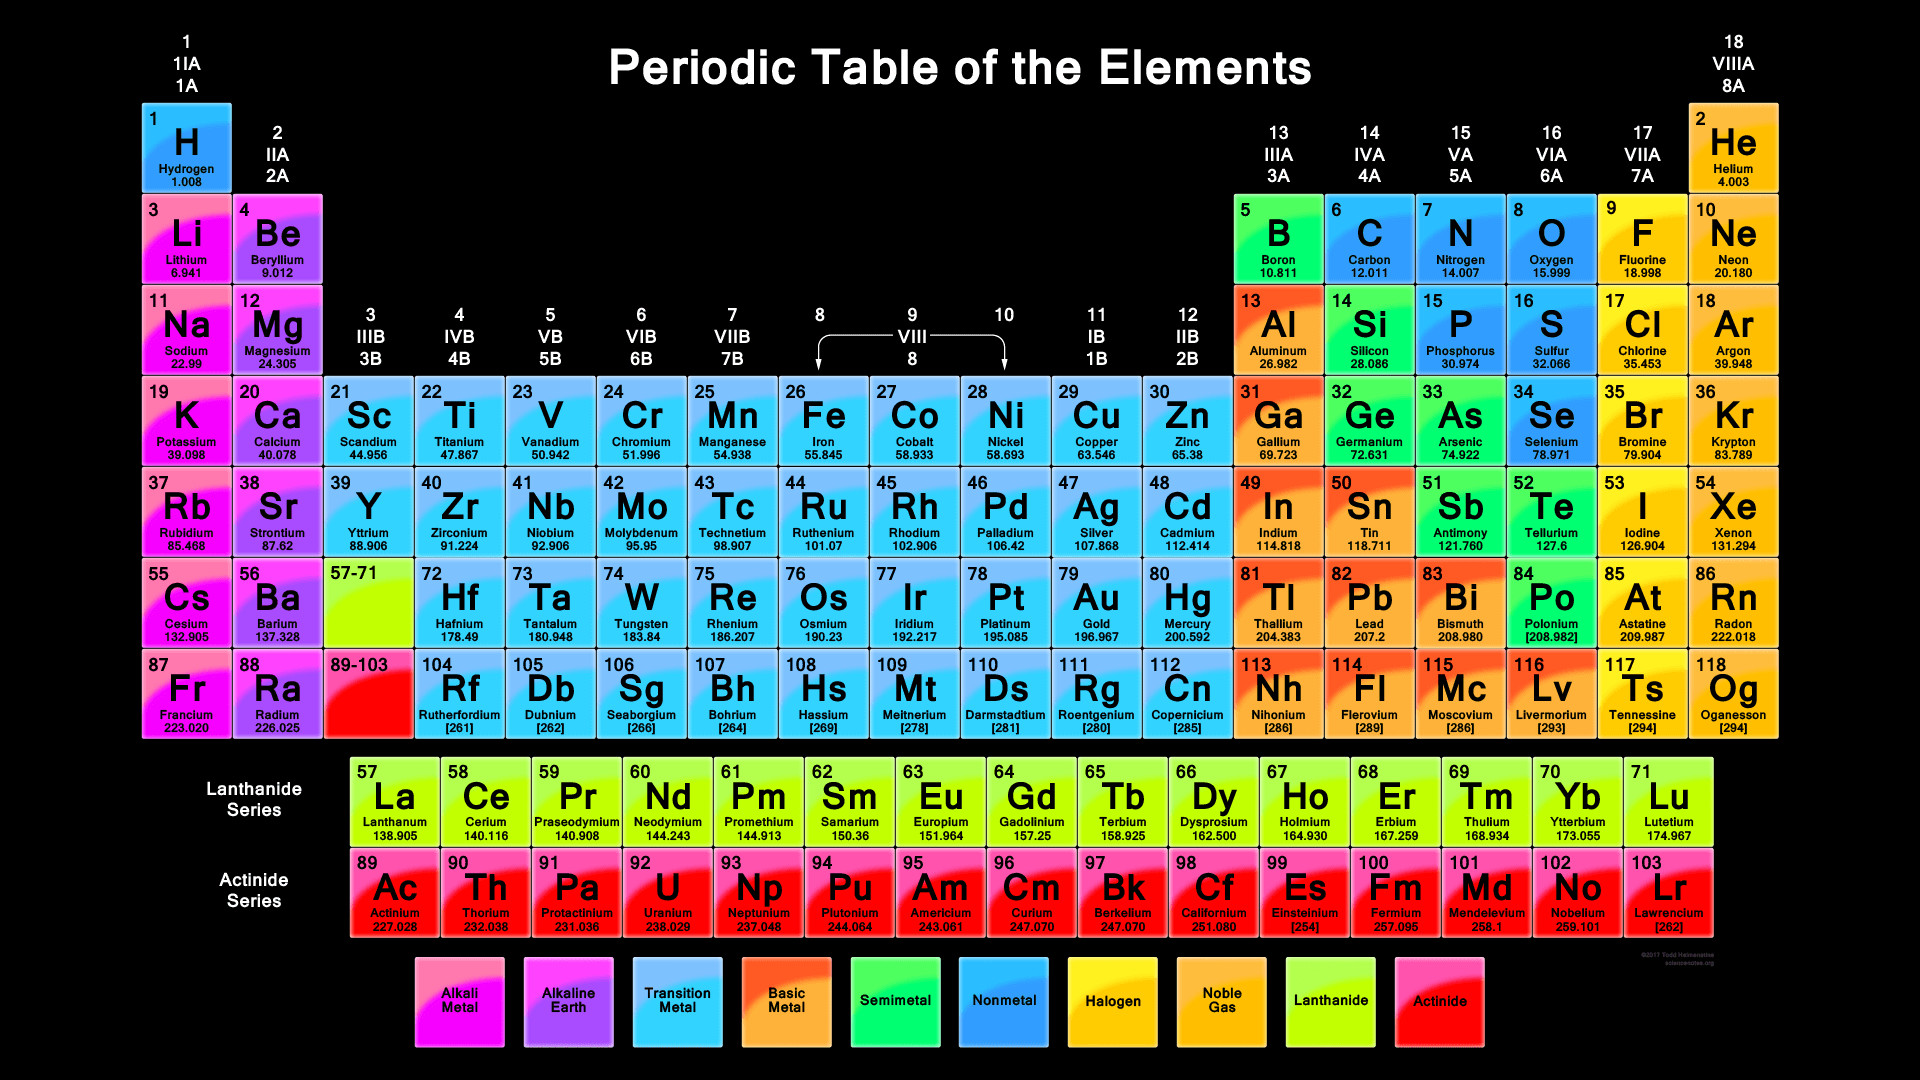 1920x1080 This HD wallpaper of periodic table contains each element's number, symbol,  name, and